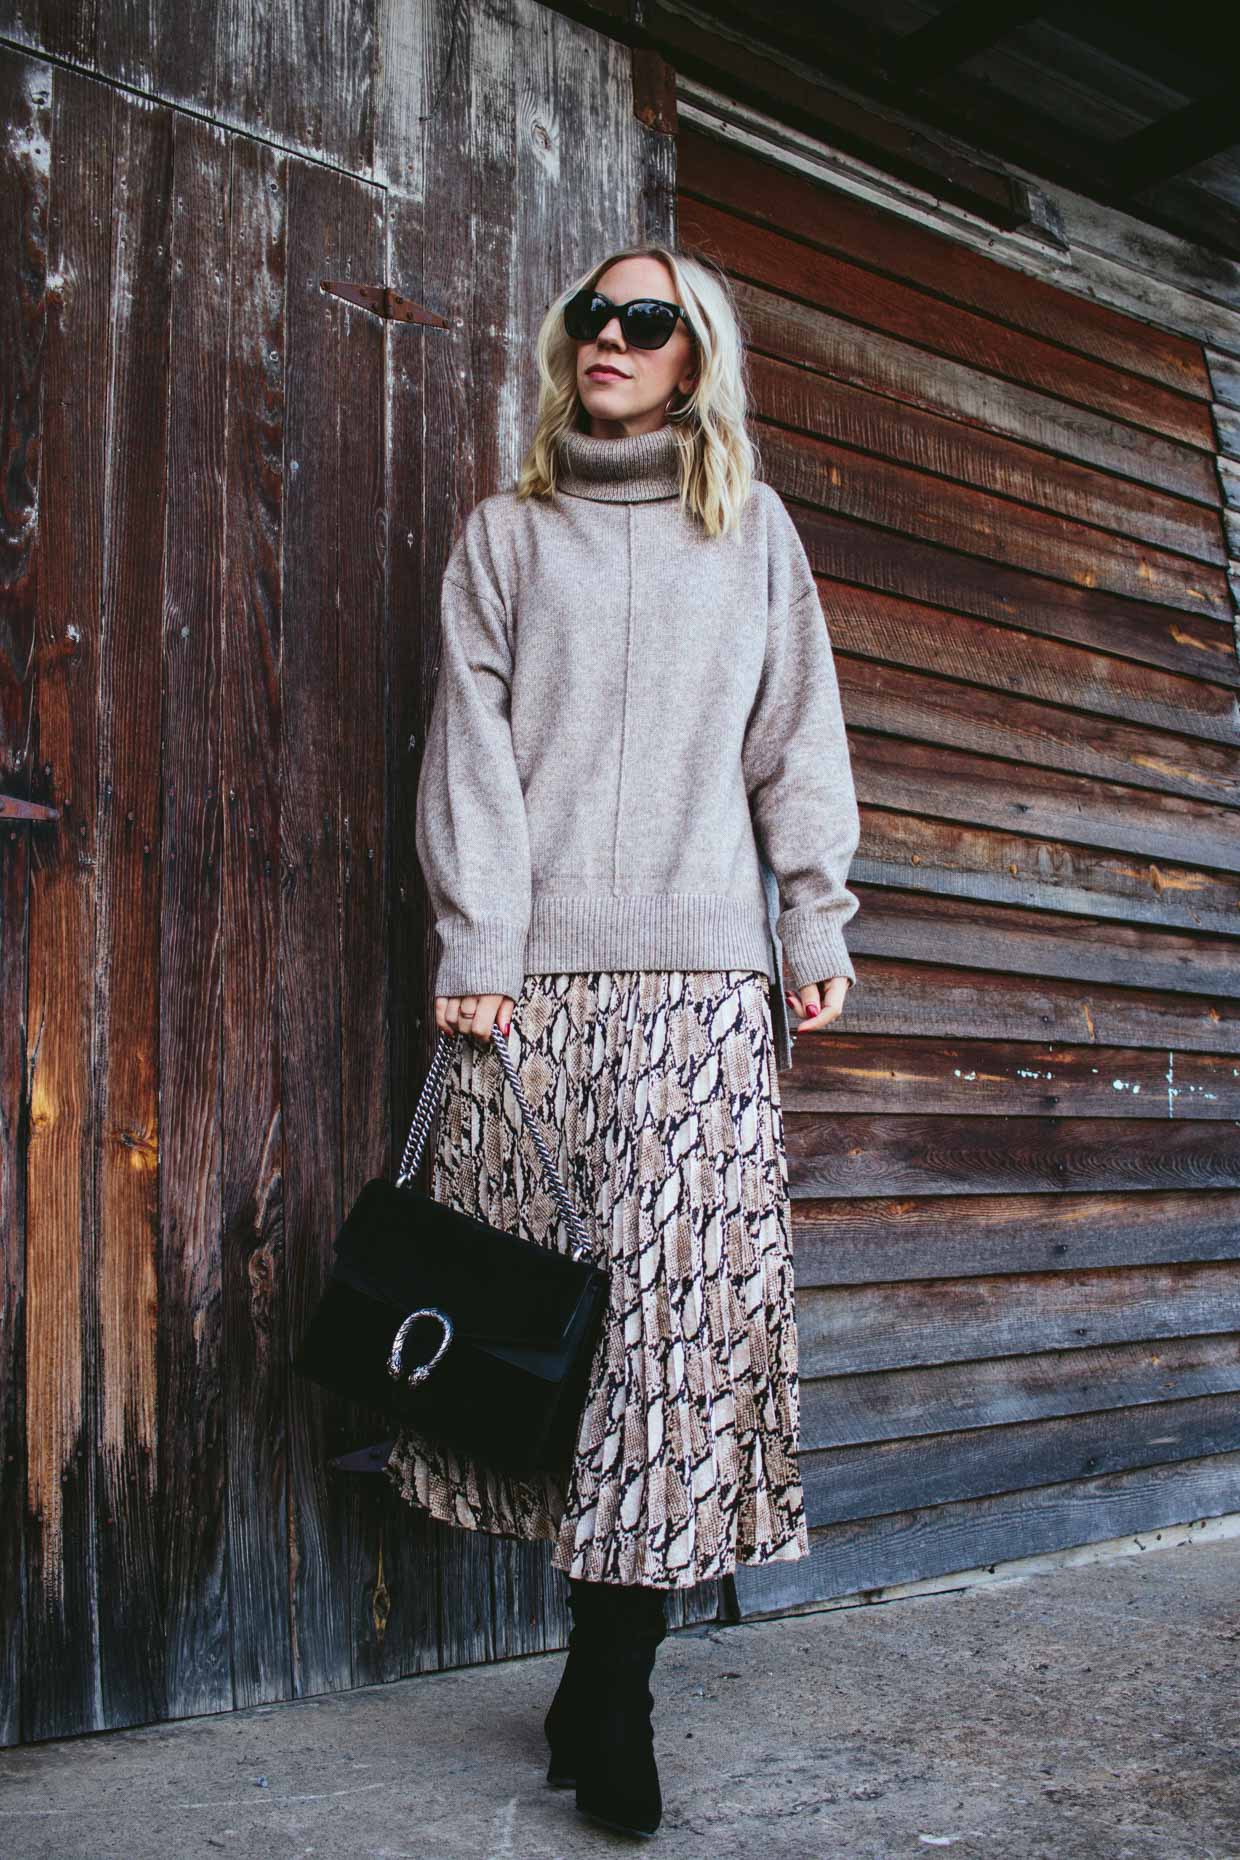 https://meagansmoda.com/wp-content/uploads/2019/09/Meagan-Brandon-fashion-blogger-of-Meagans-Moda-shows-how-to-wear-snakeskin-print-skirt-for-fall-with-oversized-turtleneck-and-suede-sock-boots.jpg